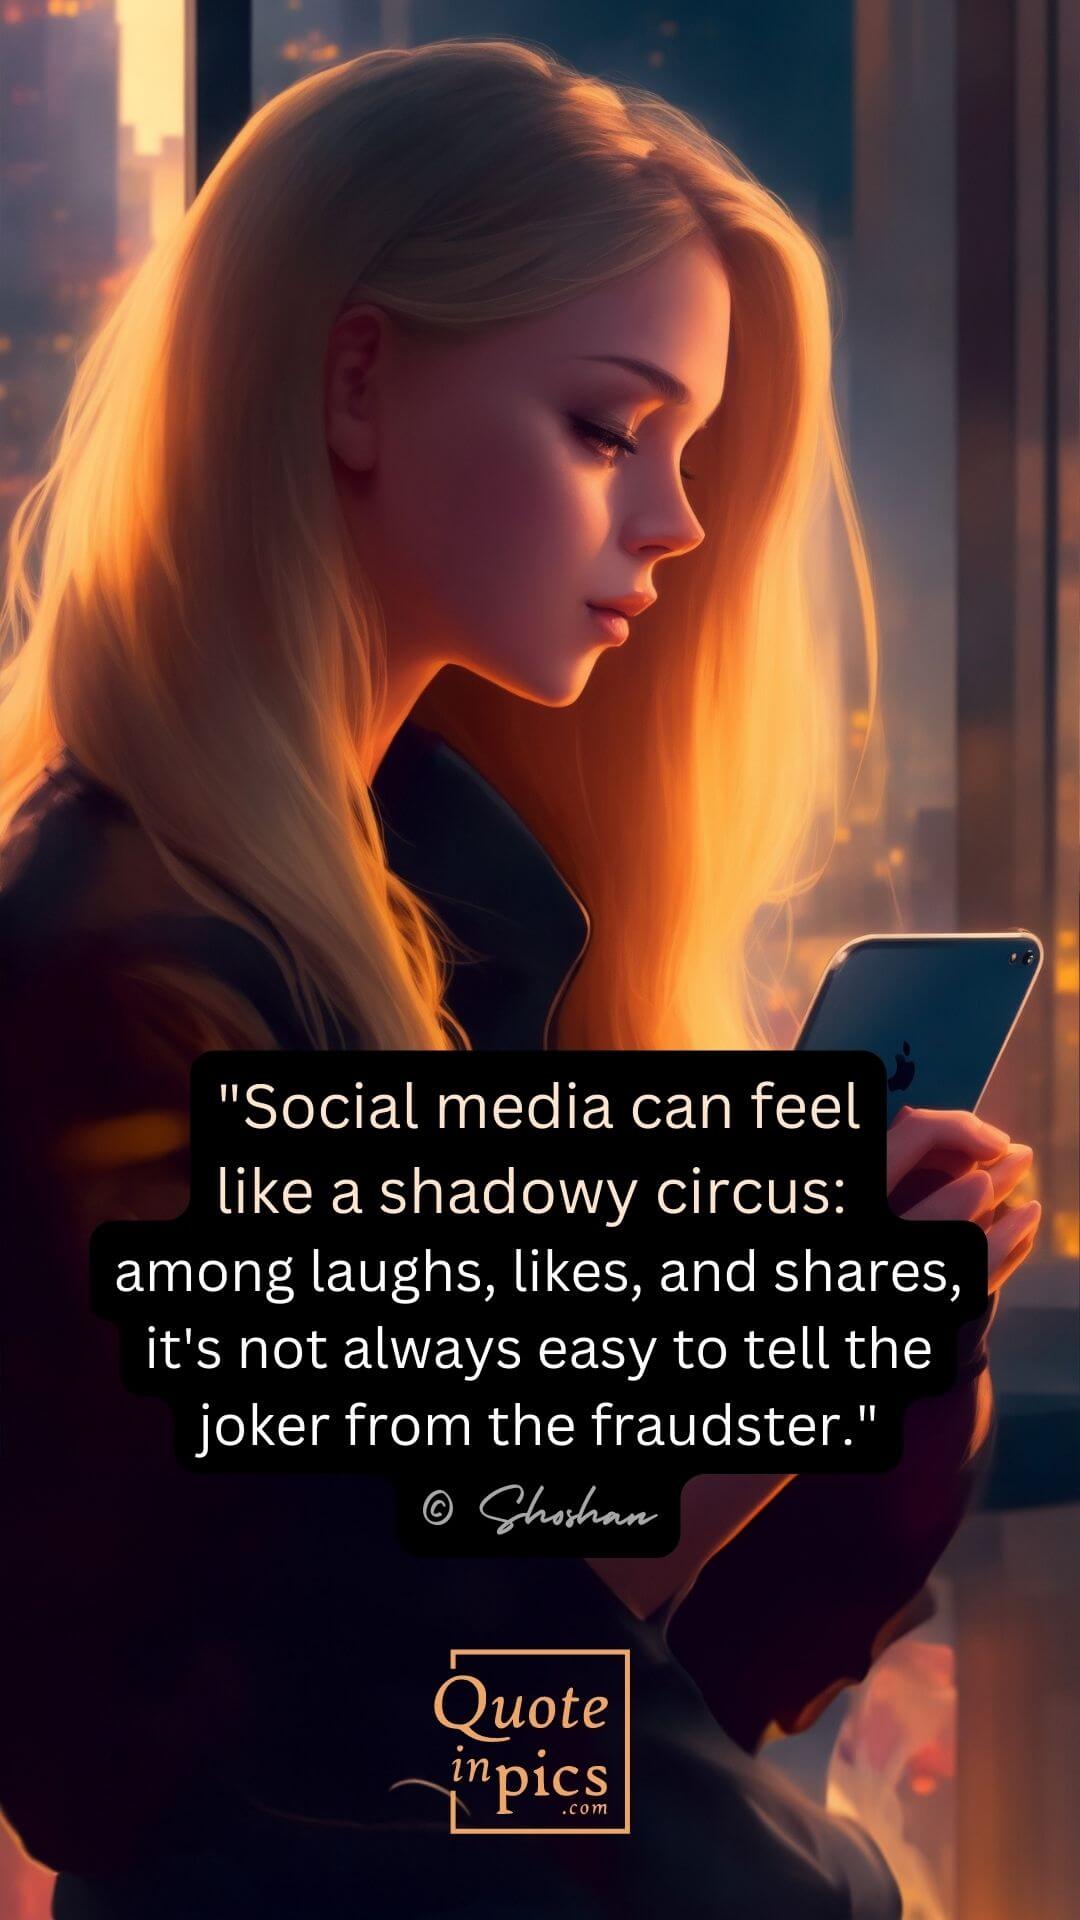 Social media can feel like a shadowy circus among laughs, likes, and shares, it's not always easy to tell the joker from the fraudster.